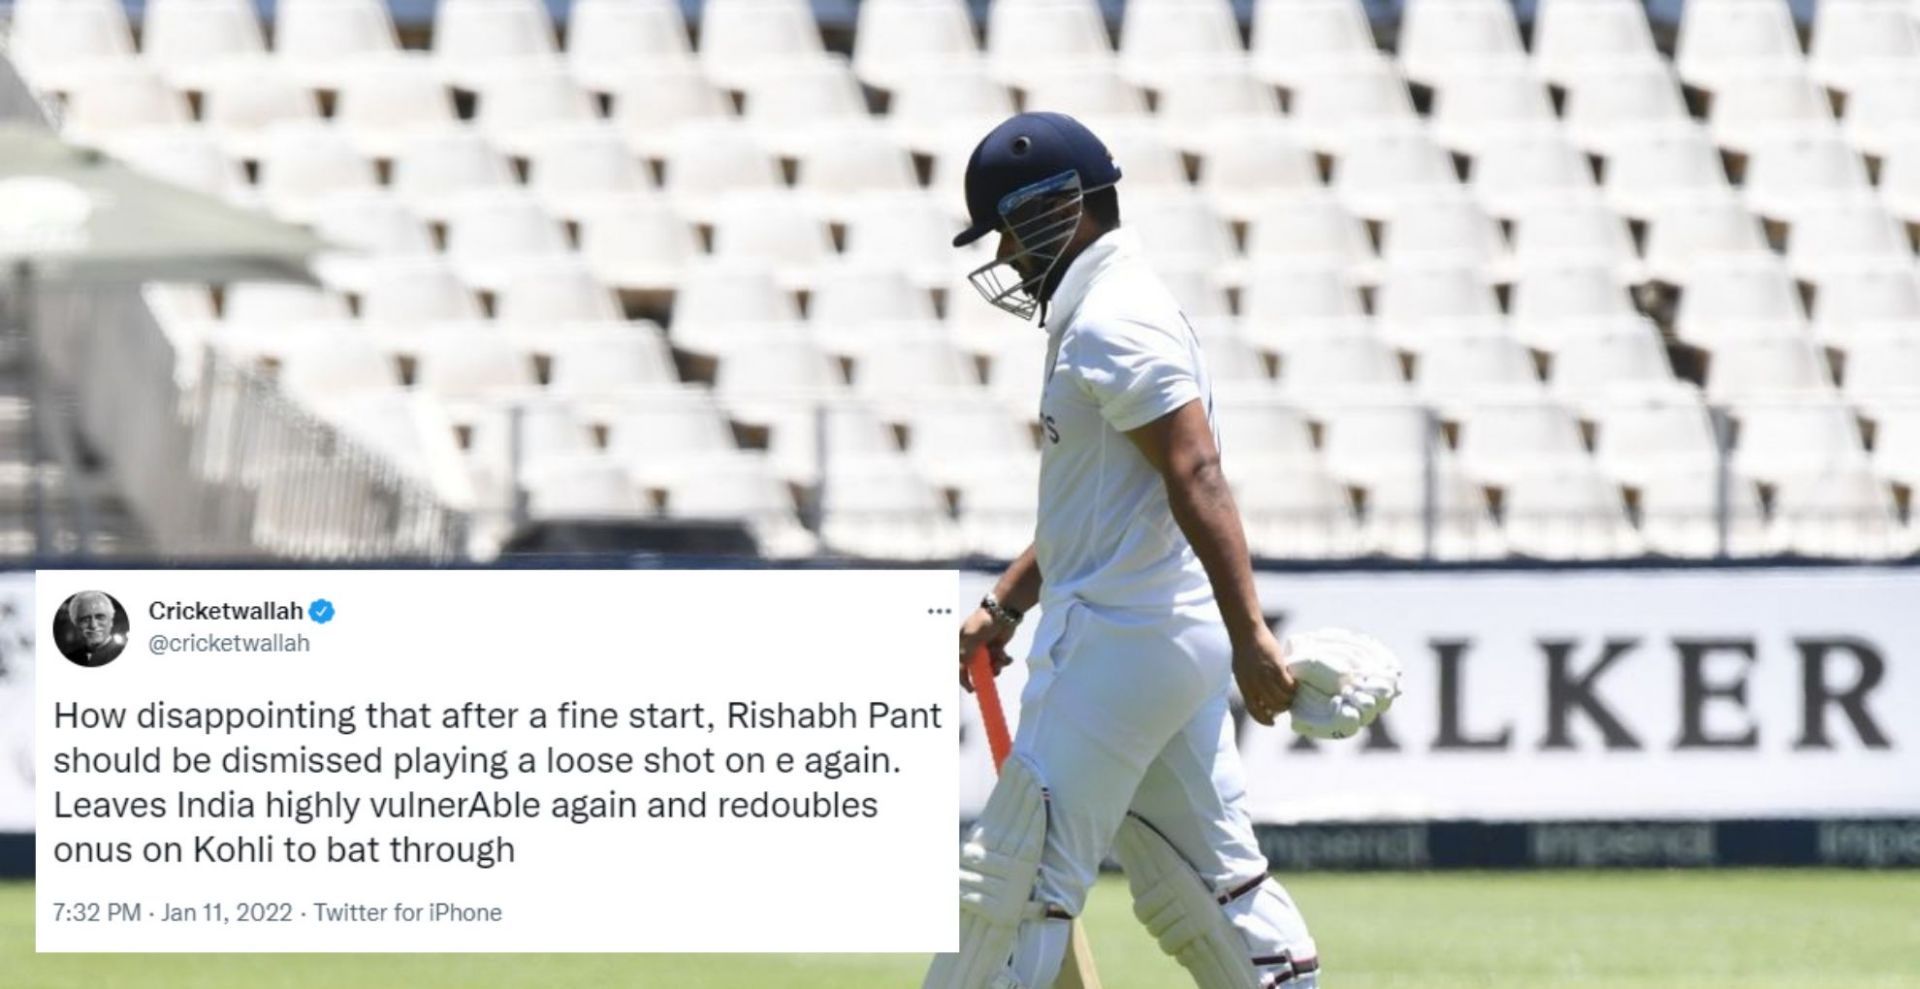 Rishabh Pant once again threw his wicket away after getting set in Cape Town